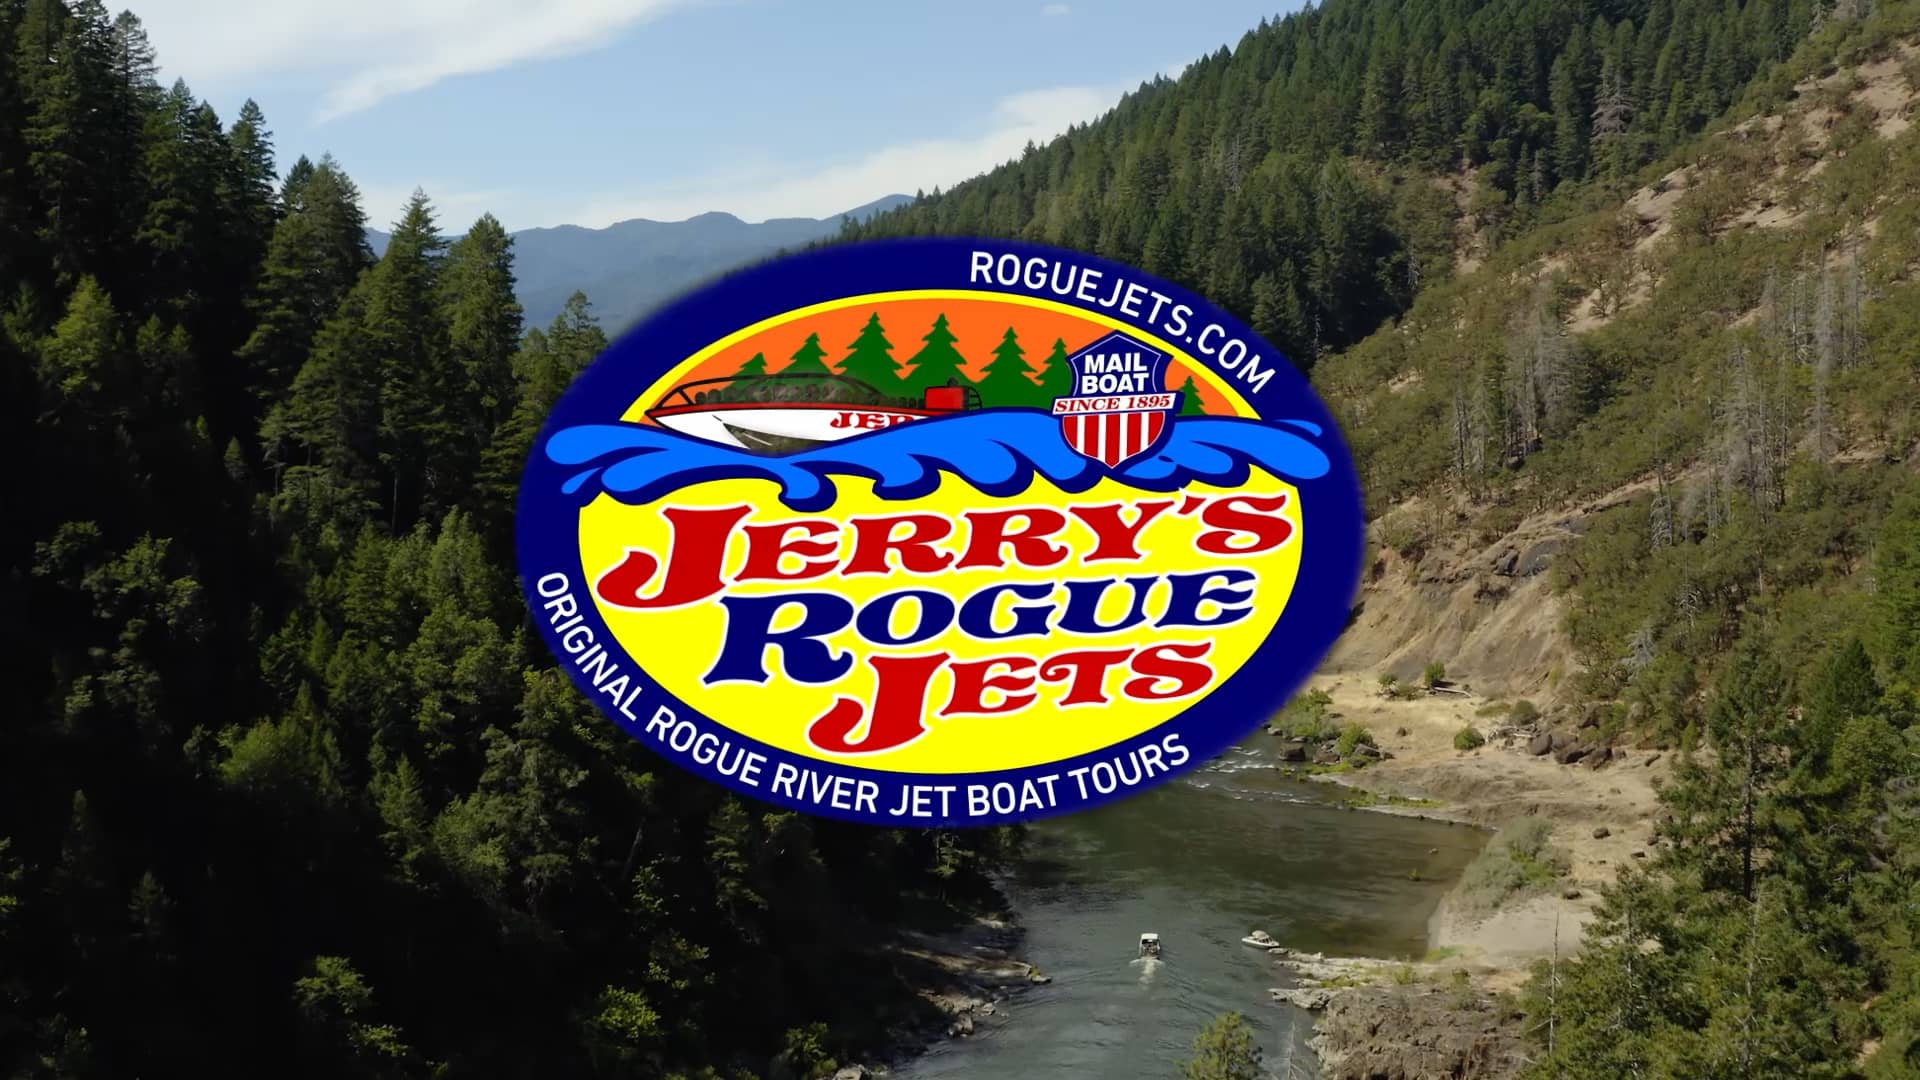 Jerry's Rogue Jets History, Tradition, and Excitement on Vimeo